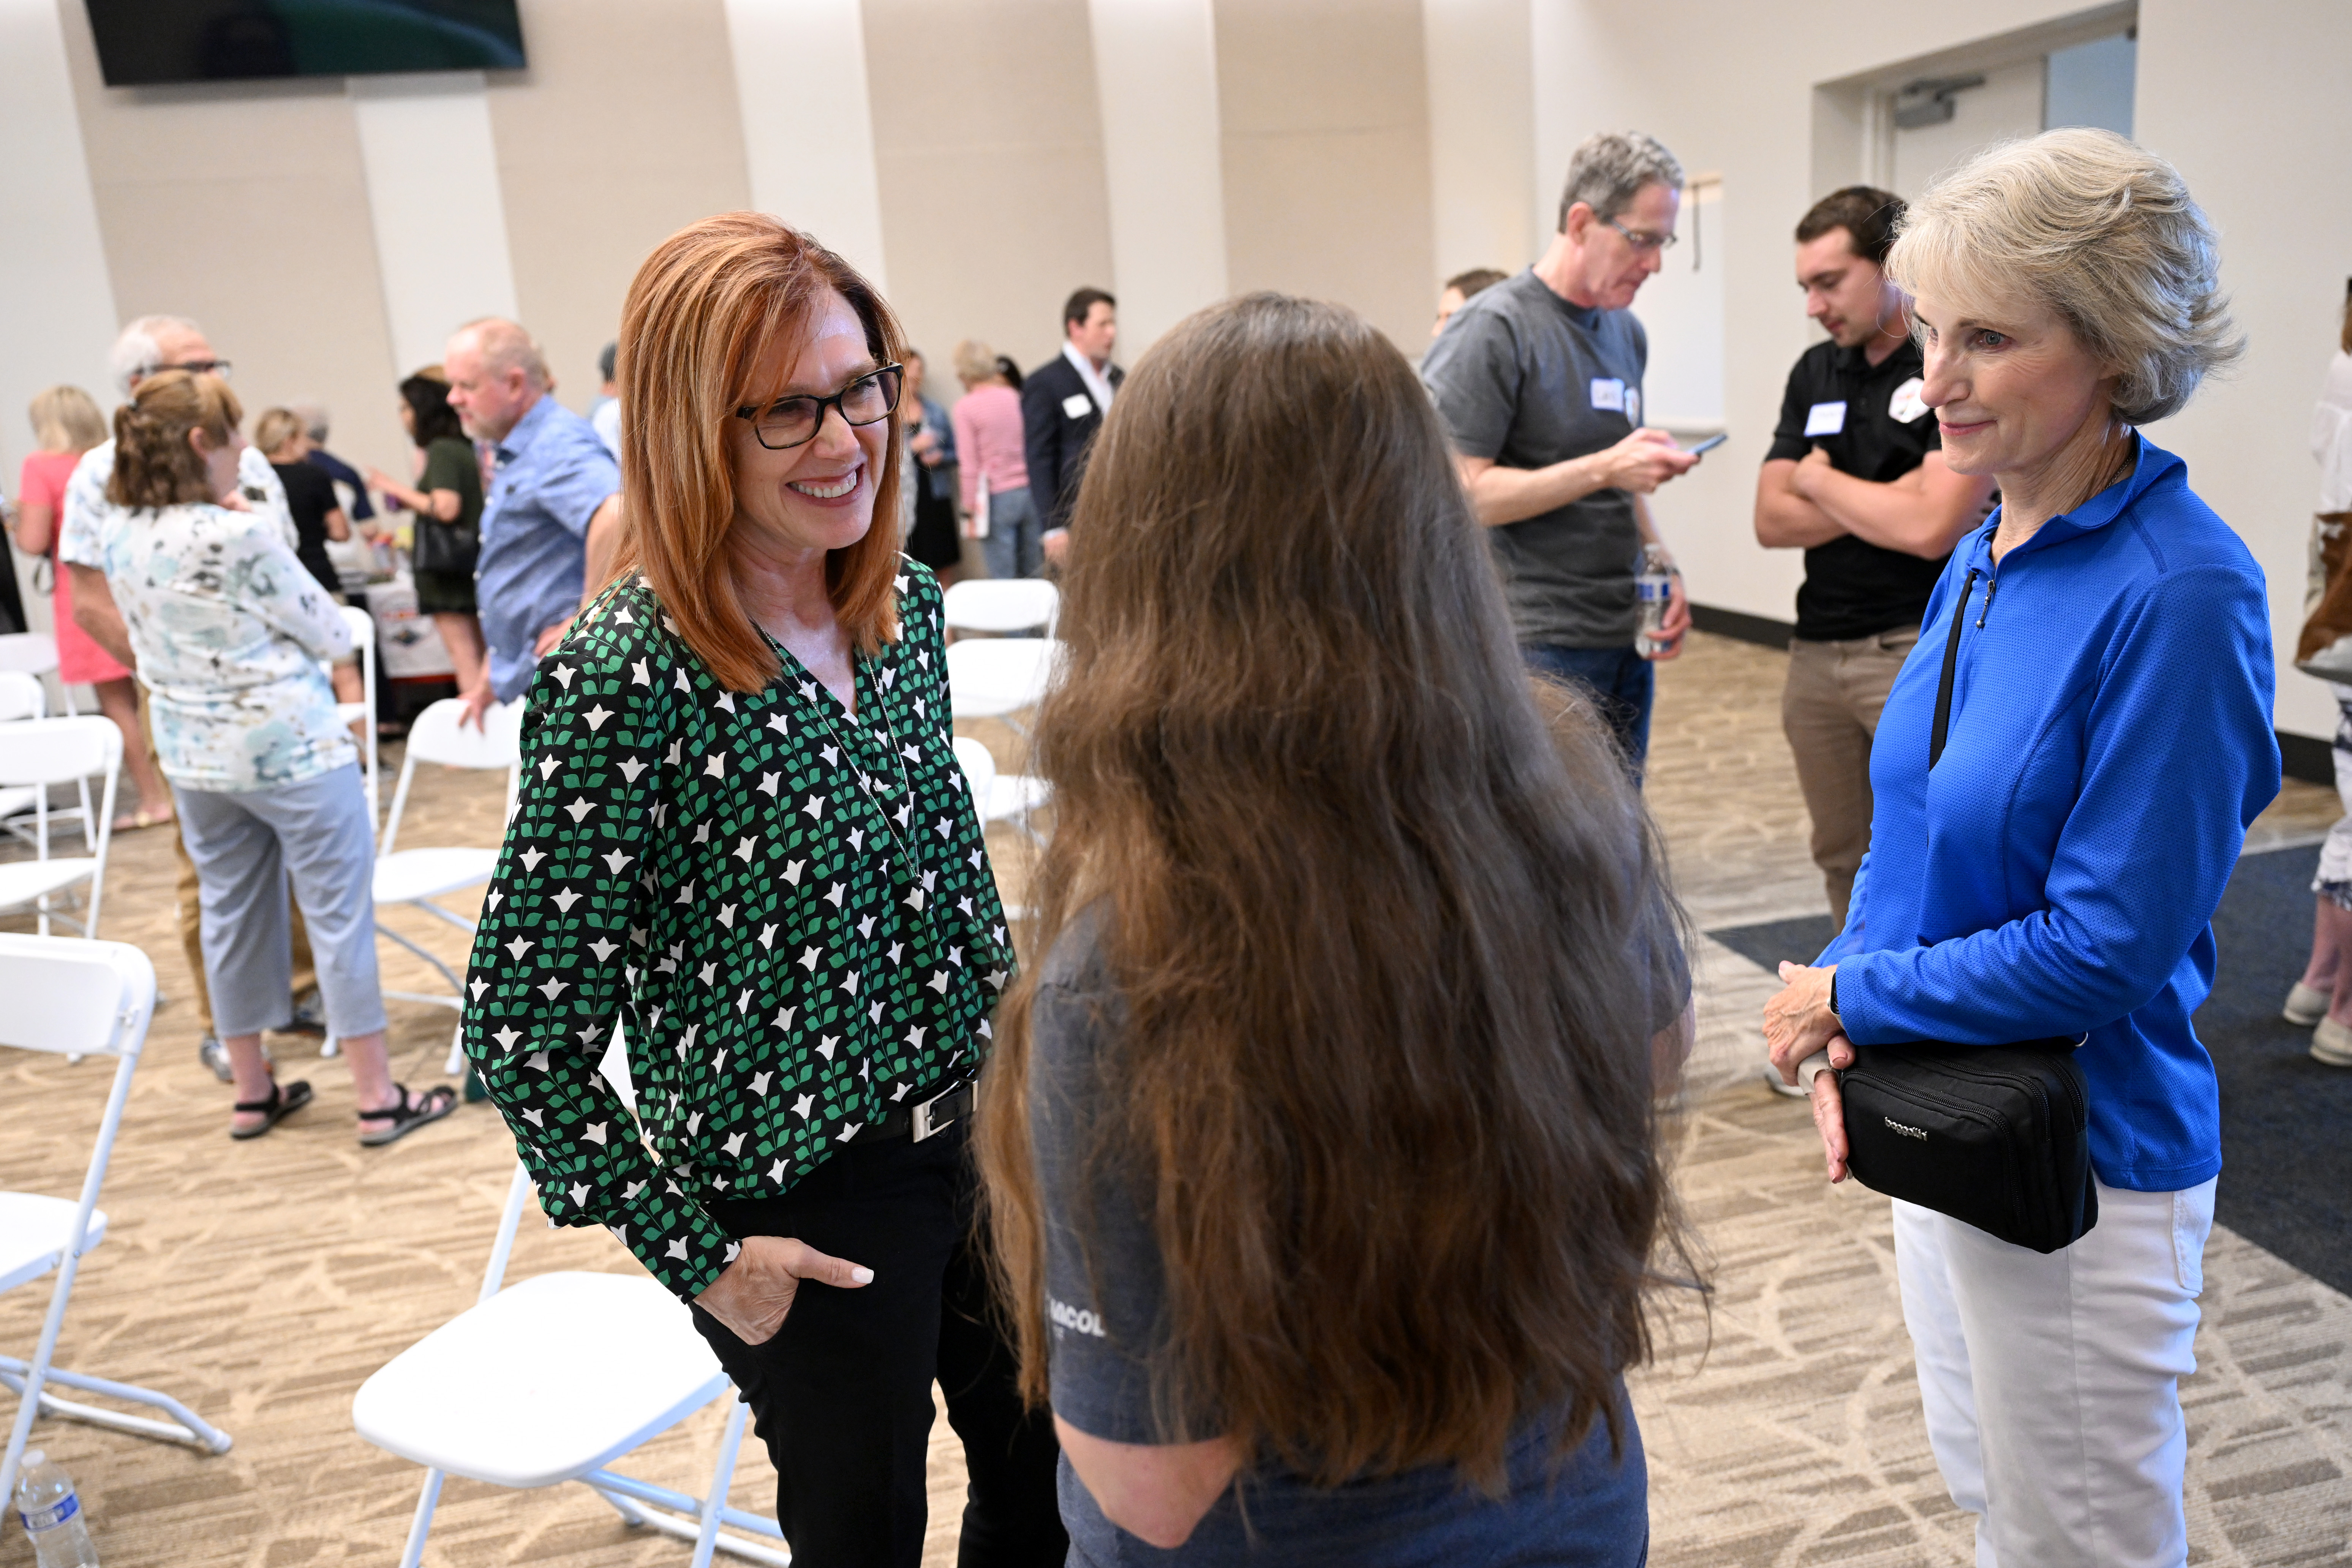 Deborah Flora, a Republican candidate in the 4th Congressional District, talks with supporters after speaking at a meet and greet event in Parker on June 3, 2024. (Photo by Helen H. Richardson/The Denver Post)